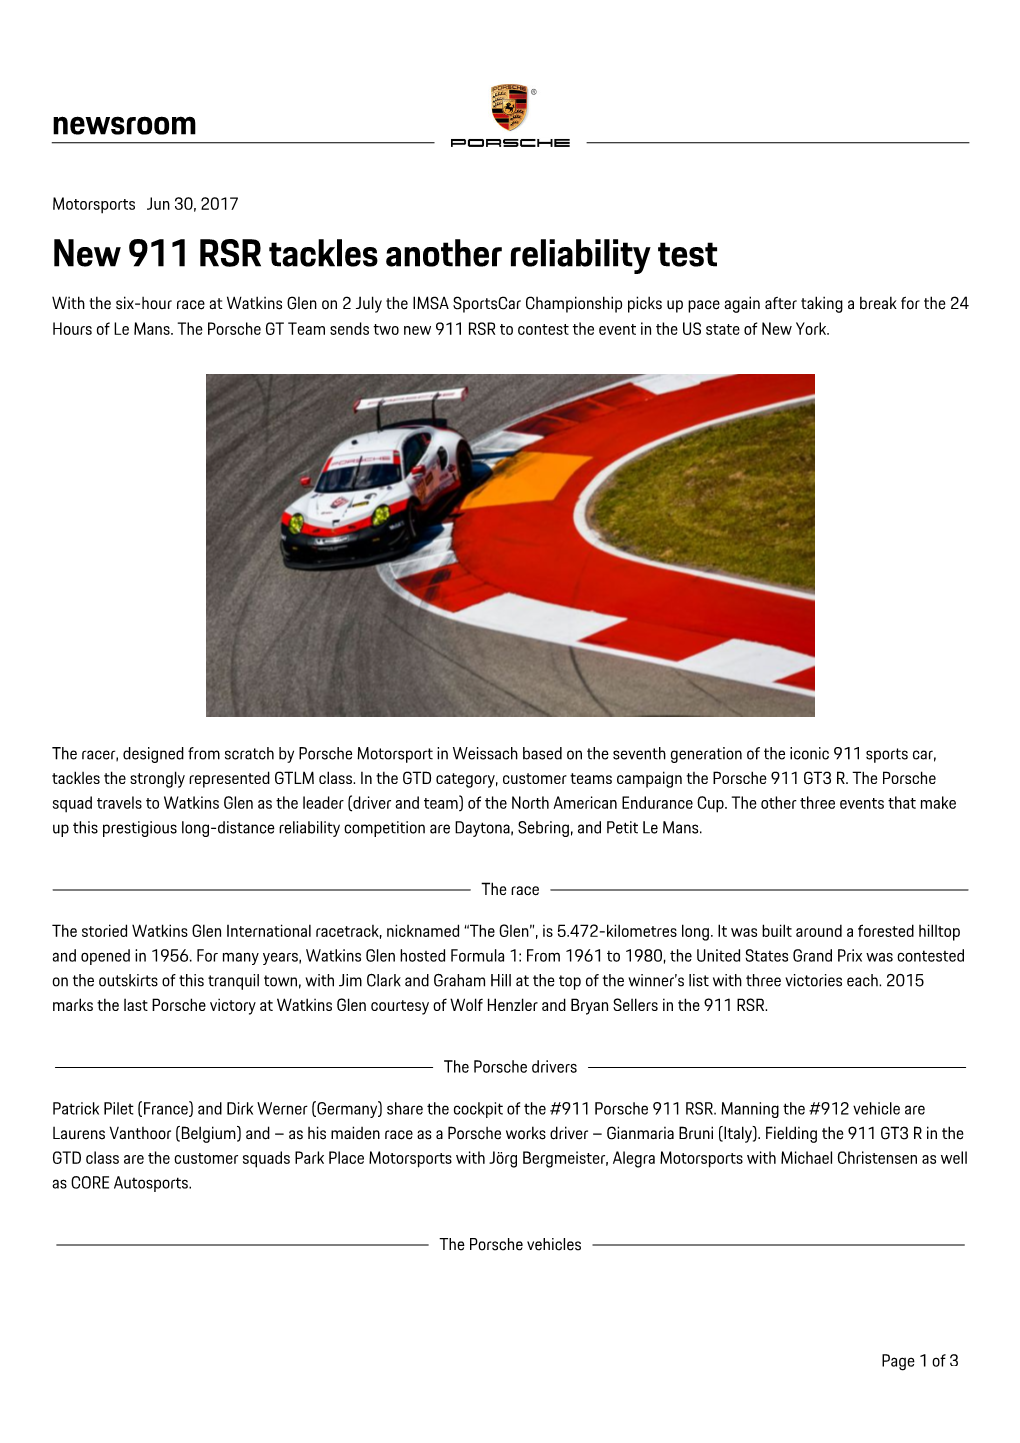 New 911 RSR Tackles Another Reliability Test